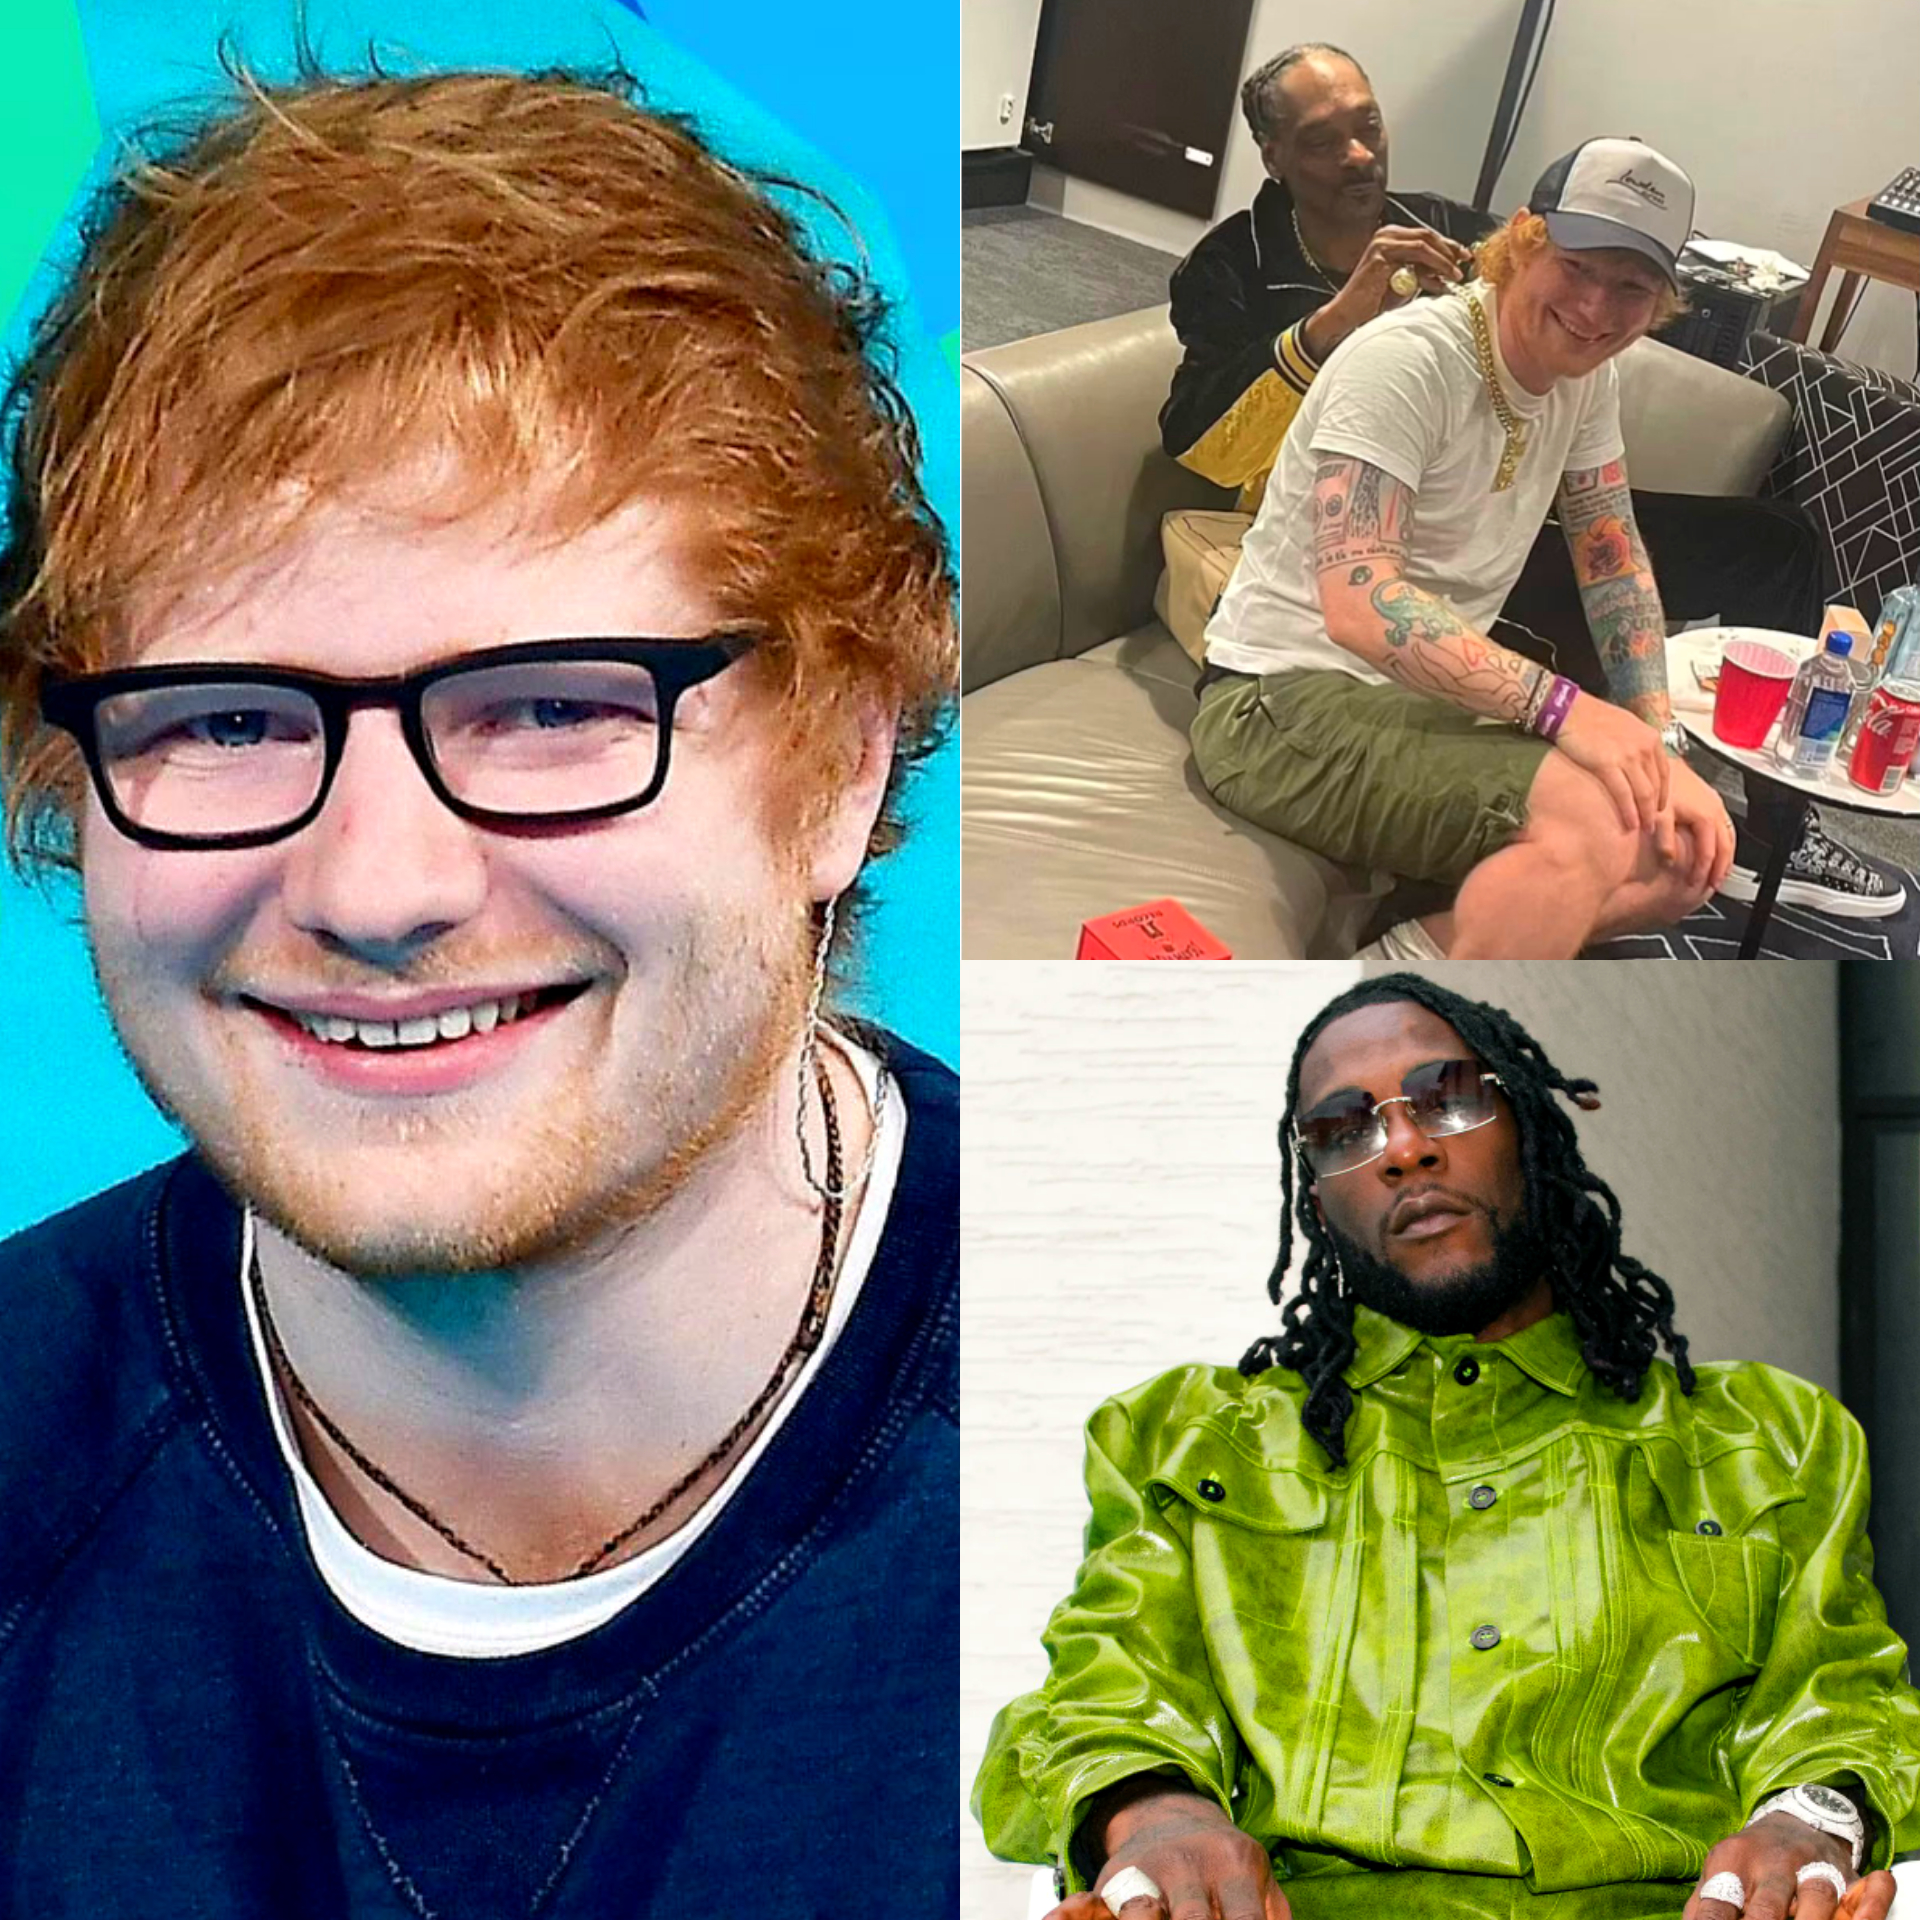 Ed Sheeran collects chains